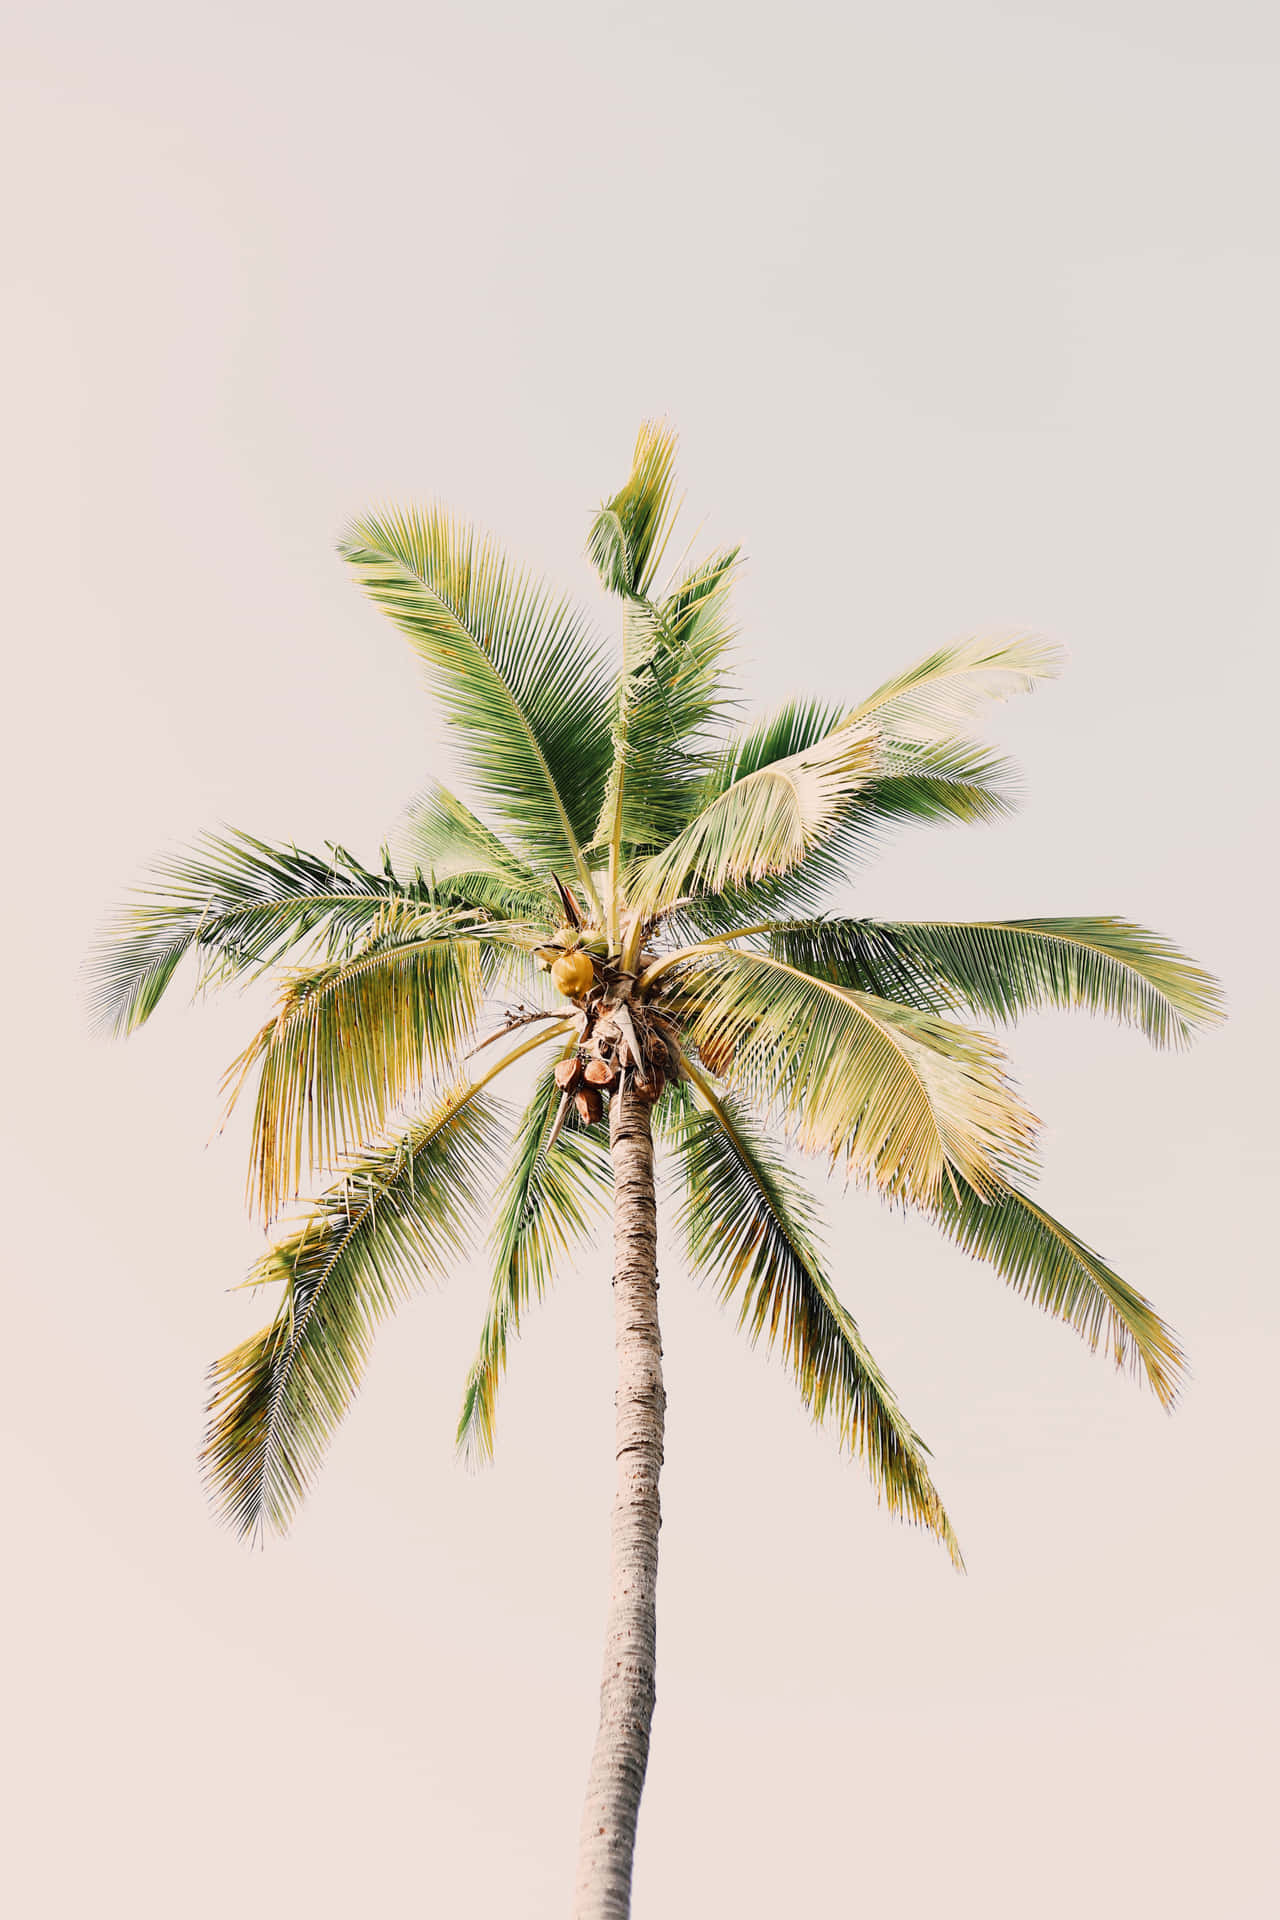 "The Perfect Place to Relax: A Cute Palm Tree" Wallpaper